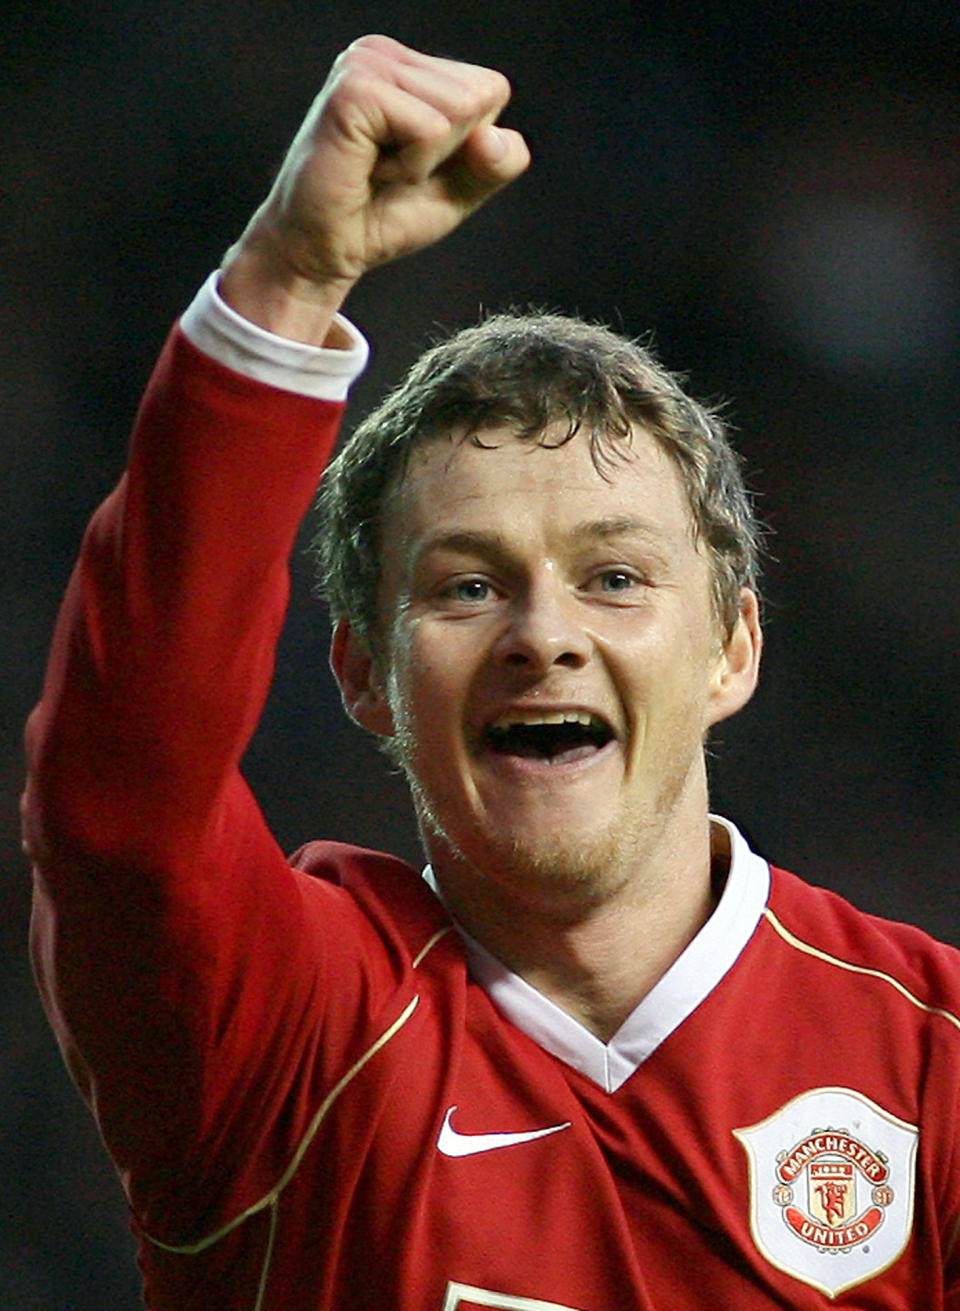 FILE - In this Sunday Jan. 7, 2007 file photo Manchester United's Ole Gunnar Solskjaer celebrates after scoring the winning goal during his team's FA Cup soccer match against Aston Villa at Old Trafford Stadium, Manchester, England. Manchester United announced Wednesday Dec. 19, 2018, they have hired Ole Gunnar Solskjaer as its manager until the end of the season, bringing the Norwegian back to the club 20 seasons after he scored its winning goal in the Champions League final. (AP Photo/Jon Super, File)